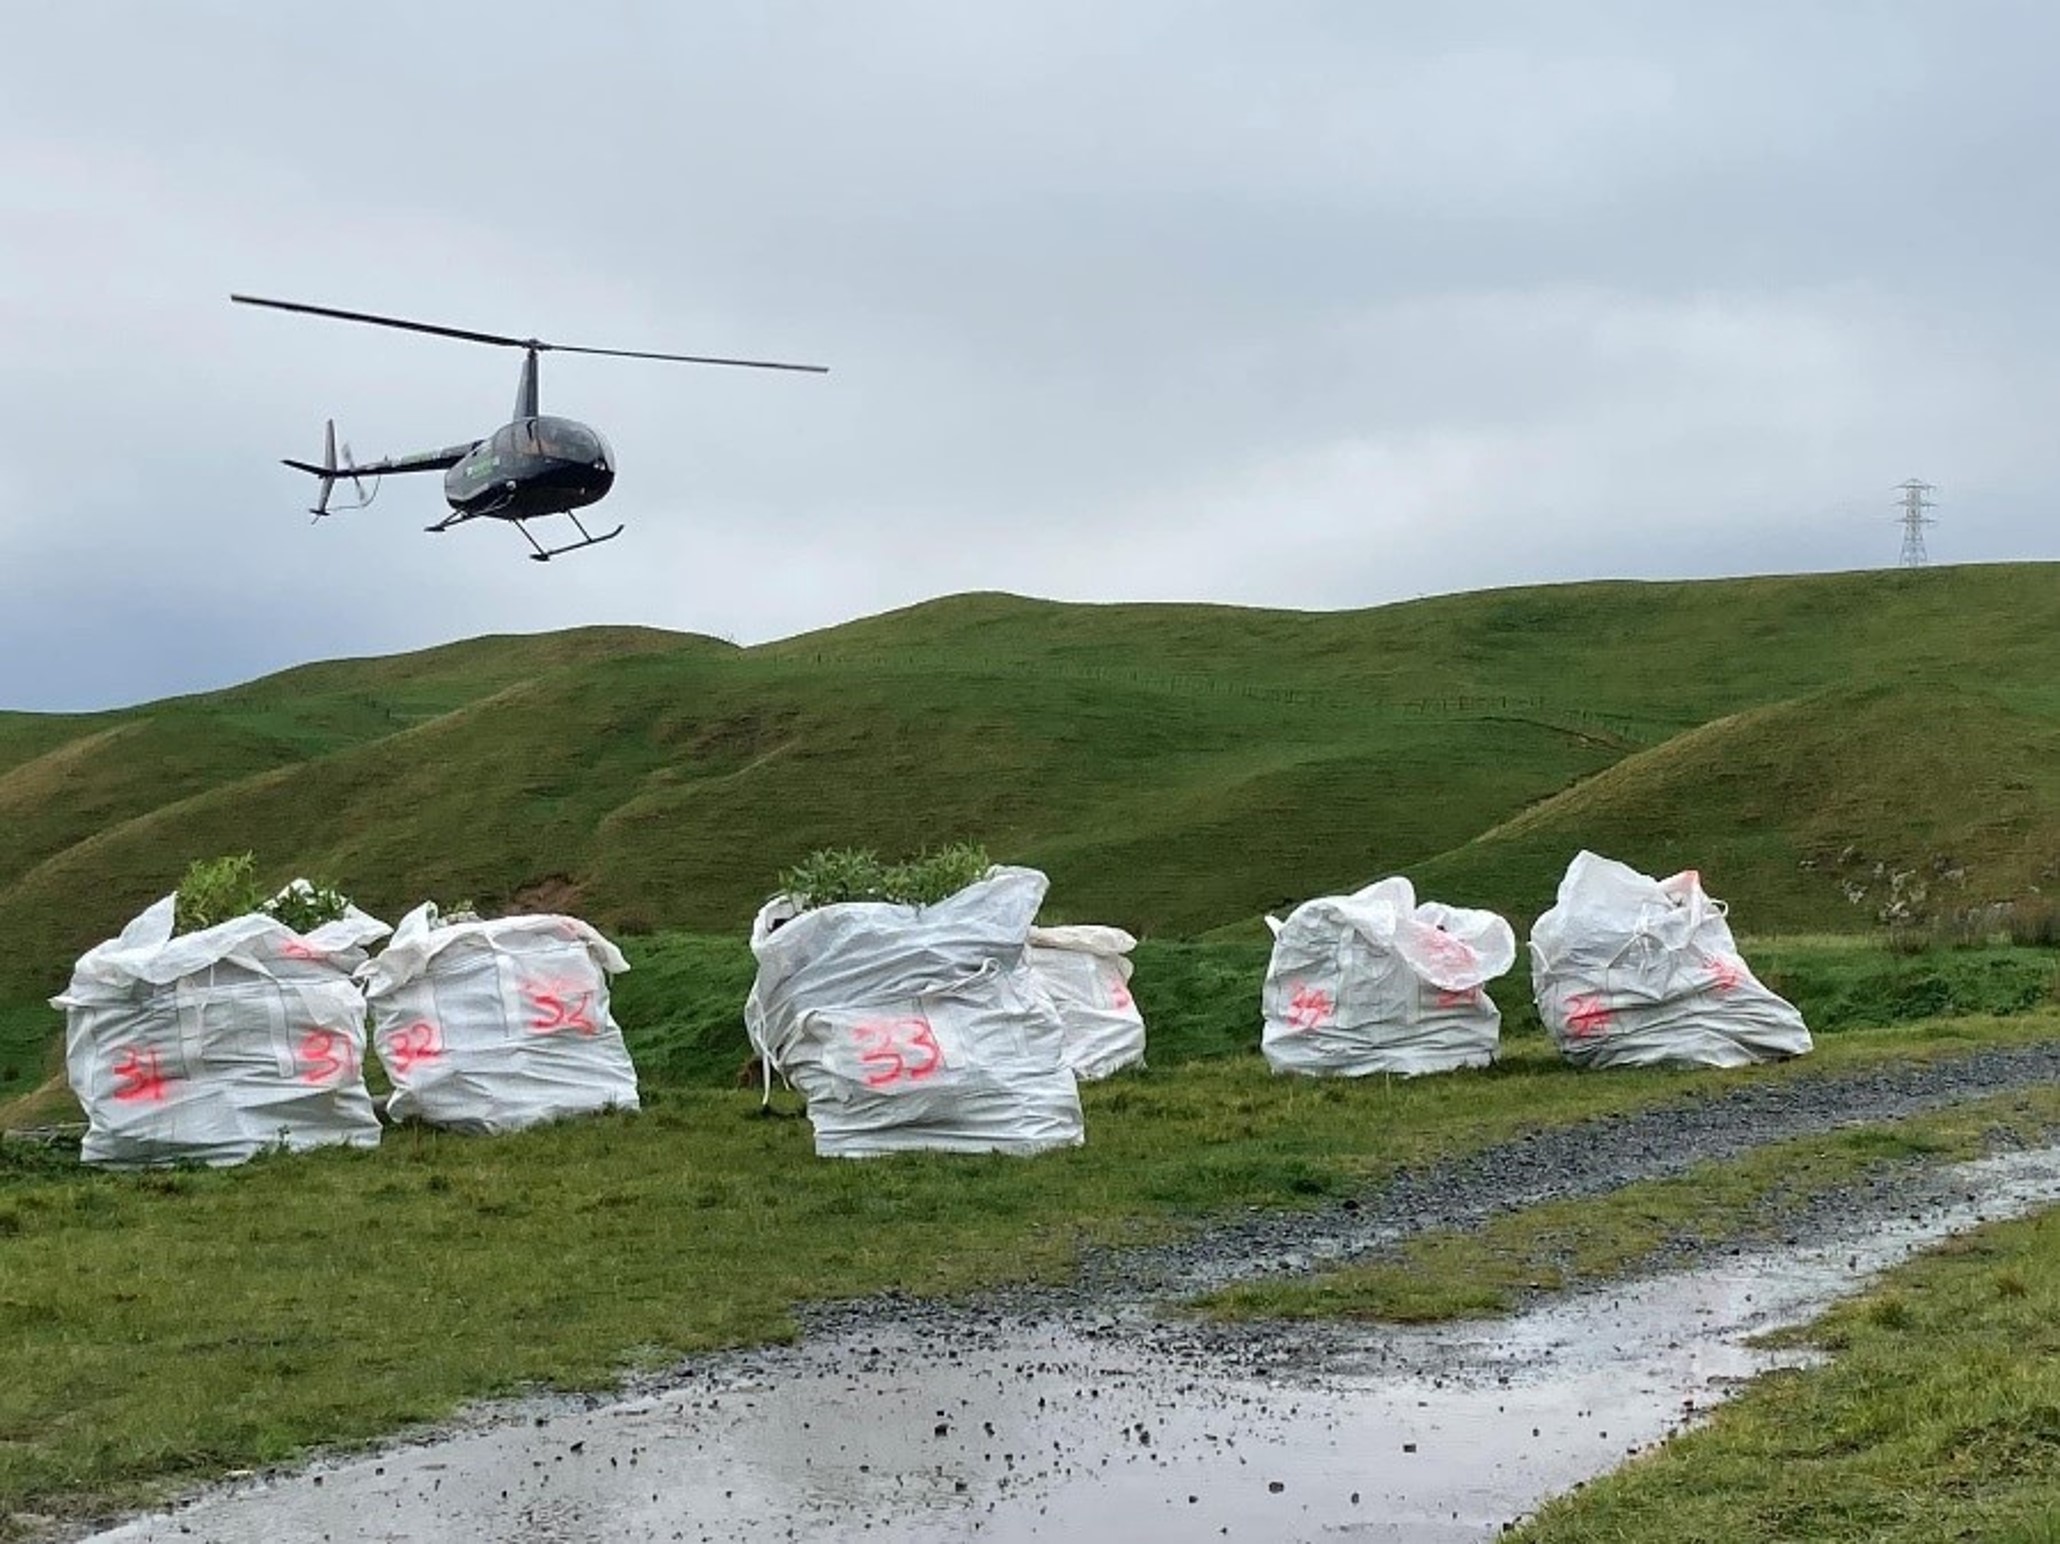 A helicopter hovers above several large bags of plants